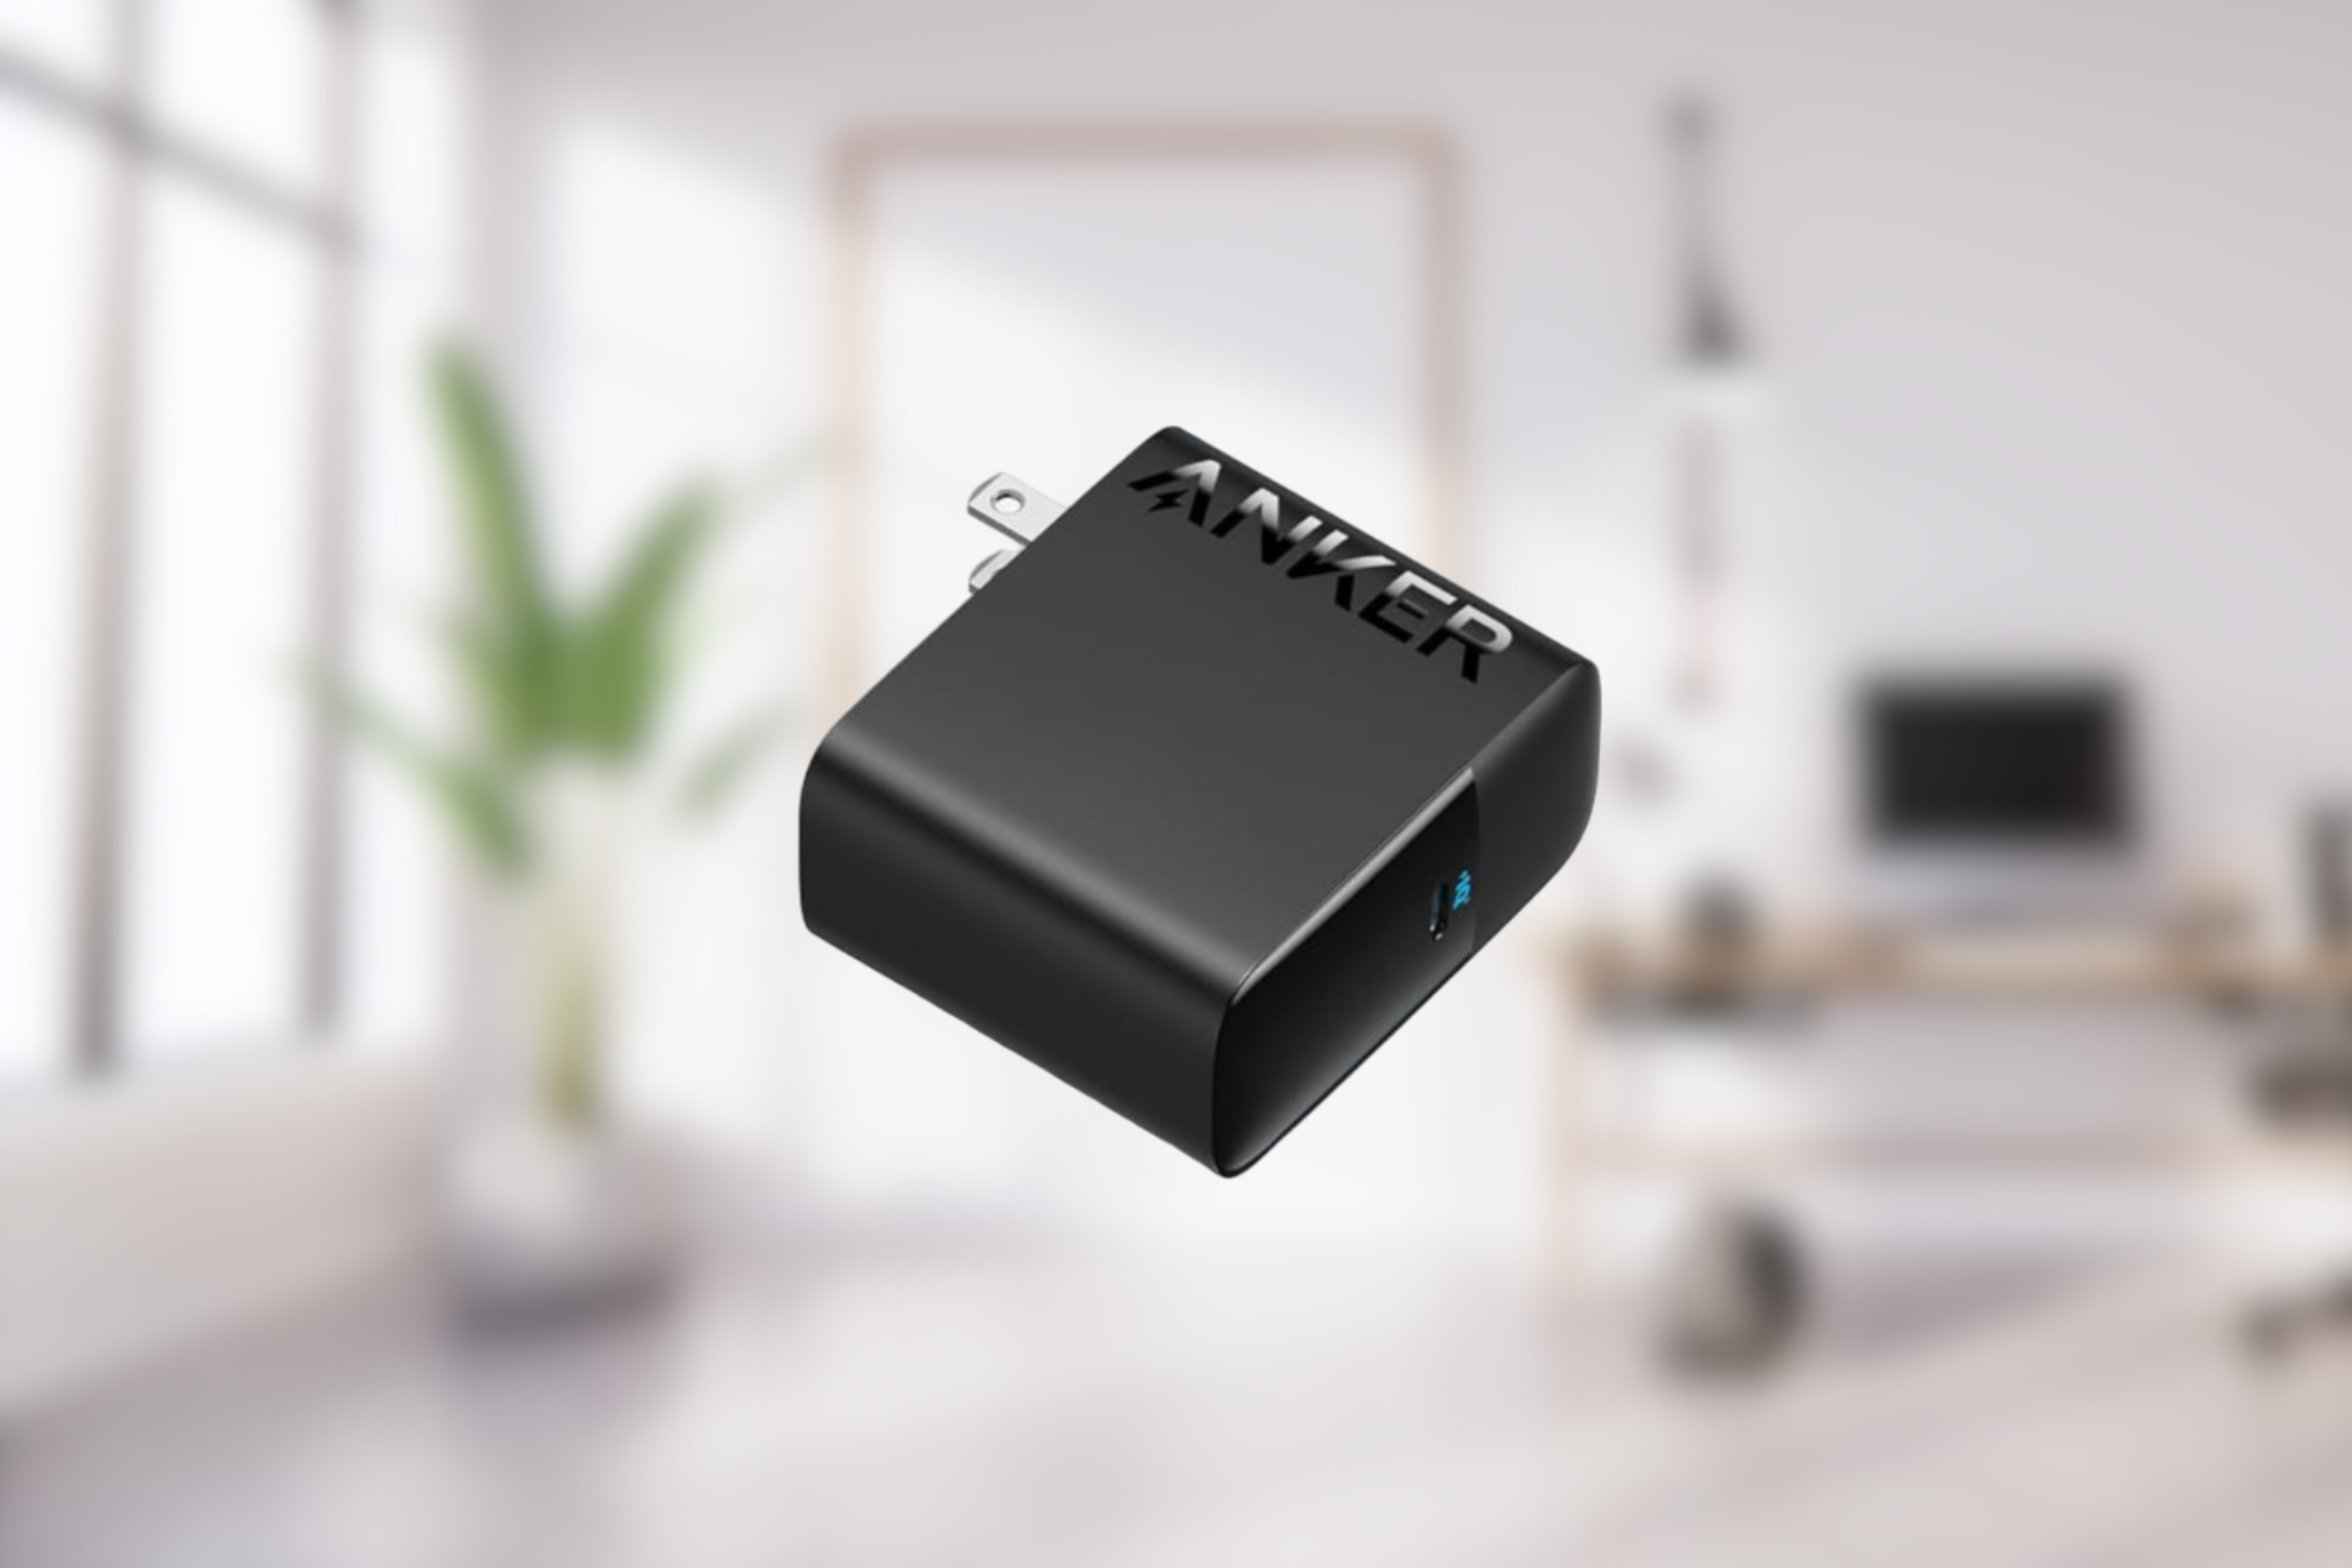 Anker 317 Charger on blurred background